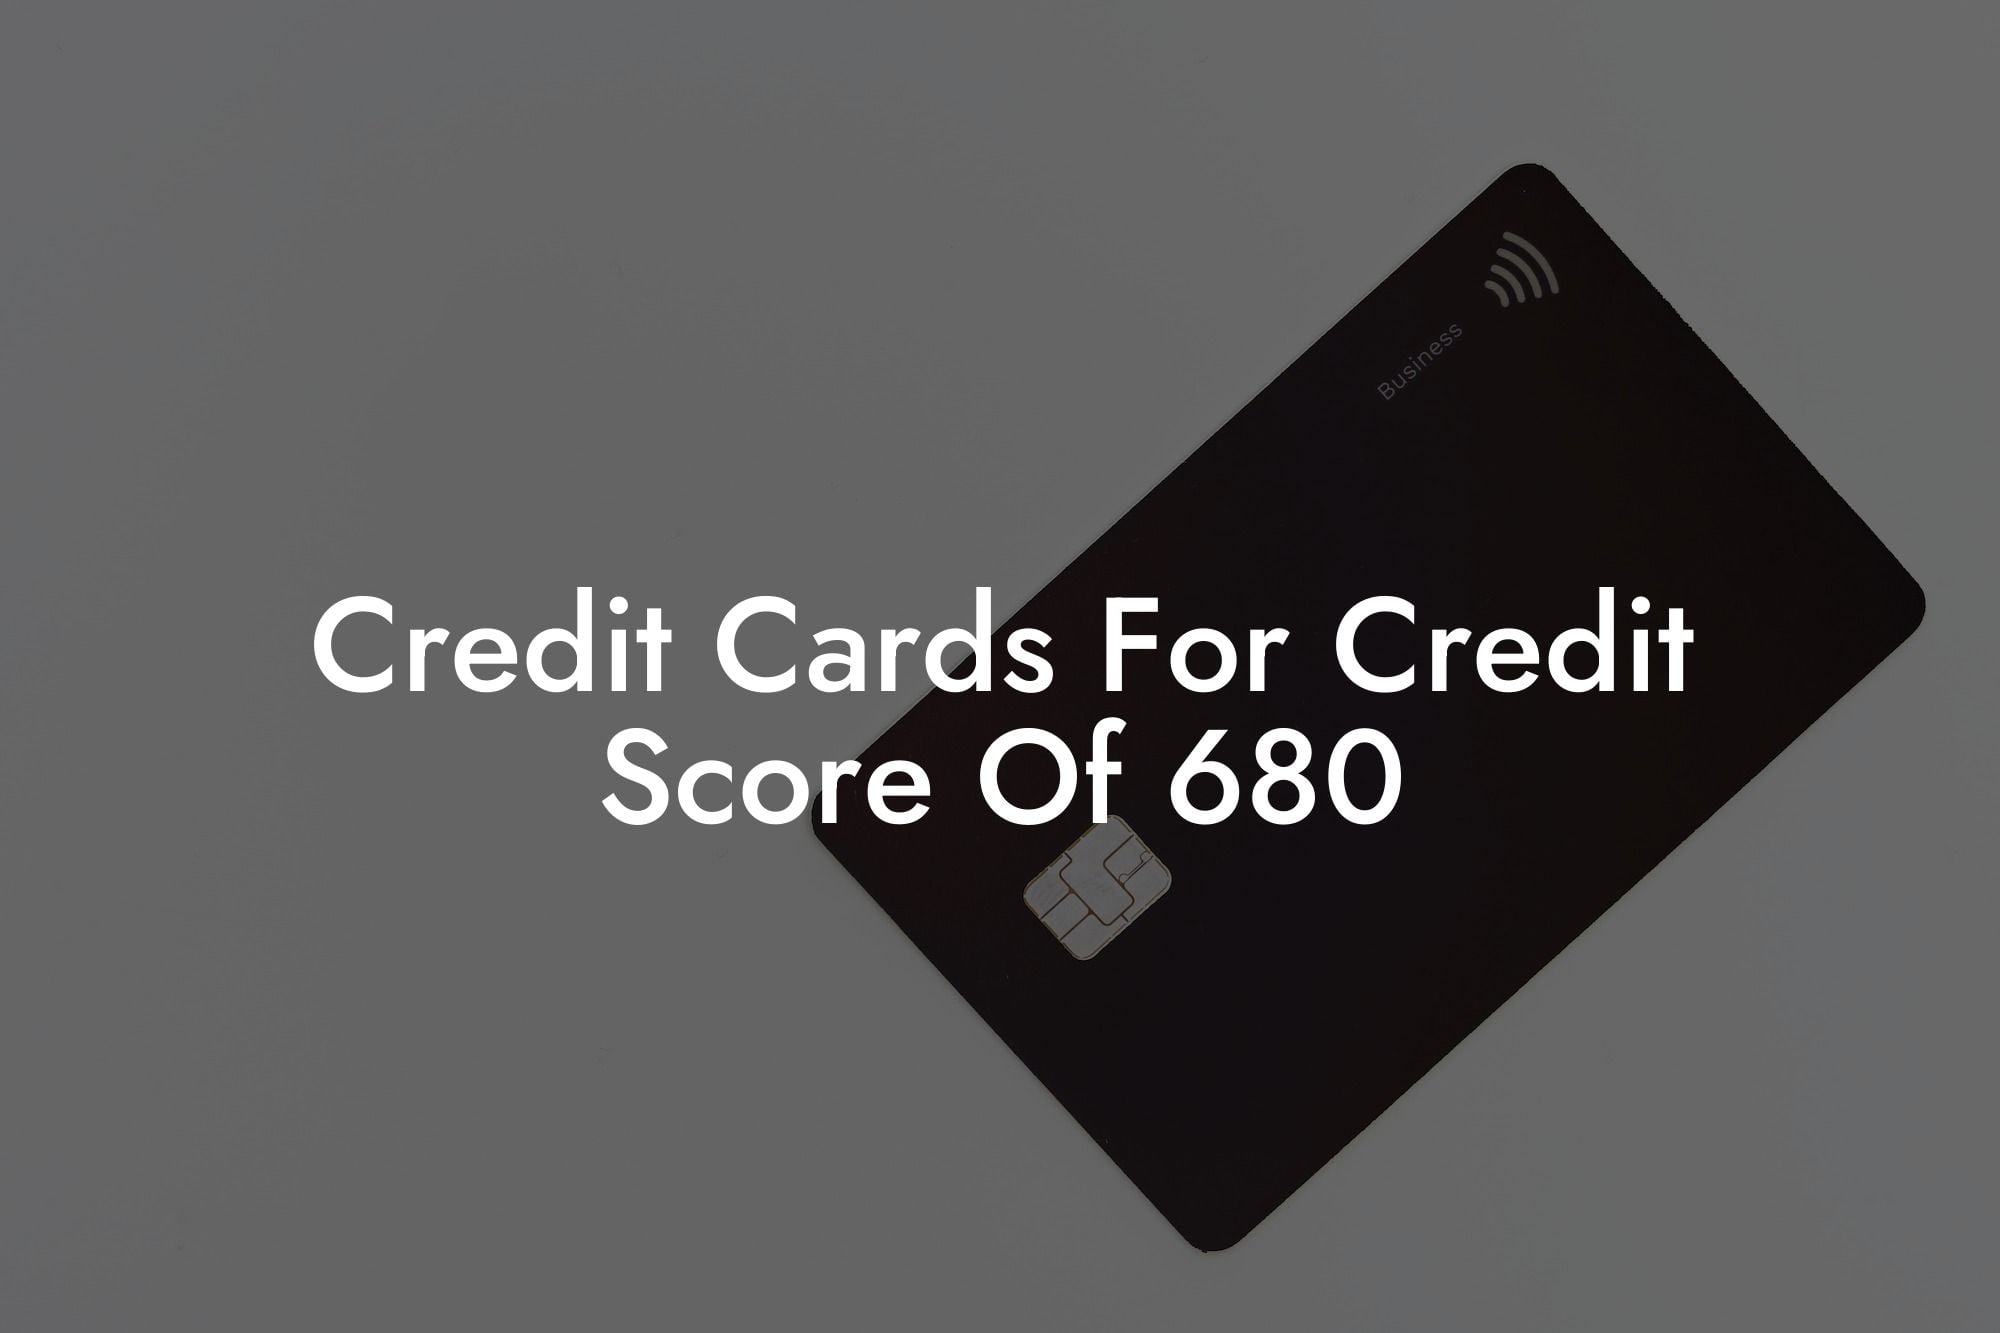 Credit Cards For Credit Score Of 680